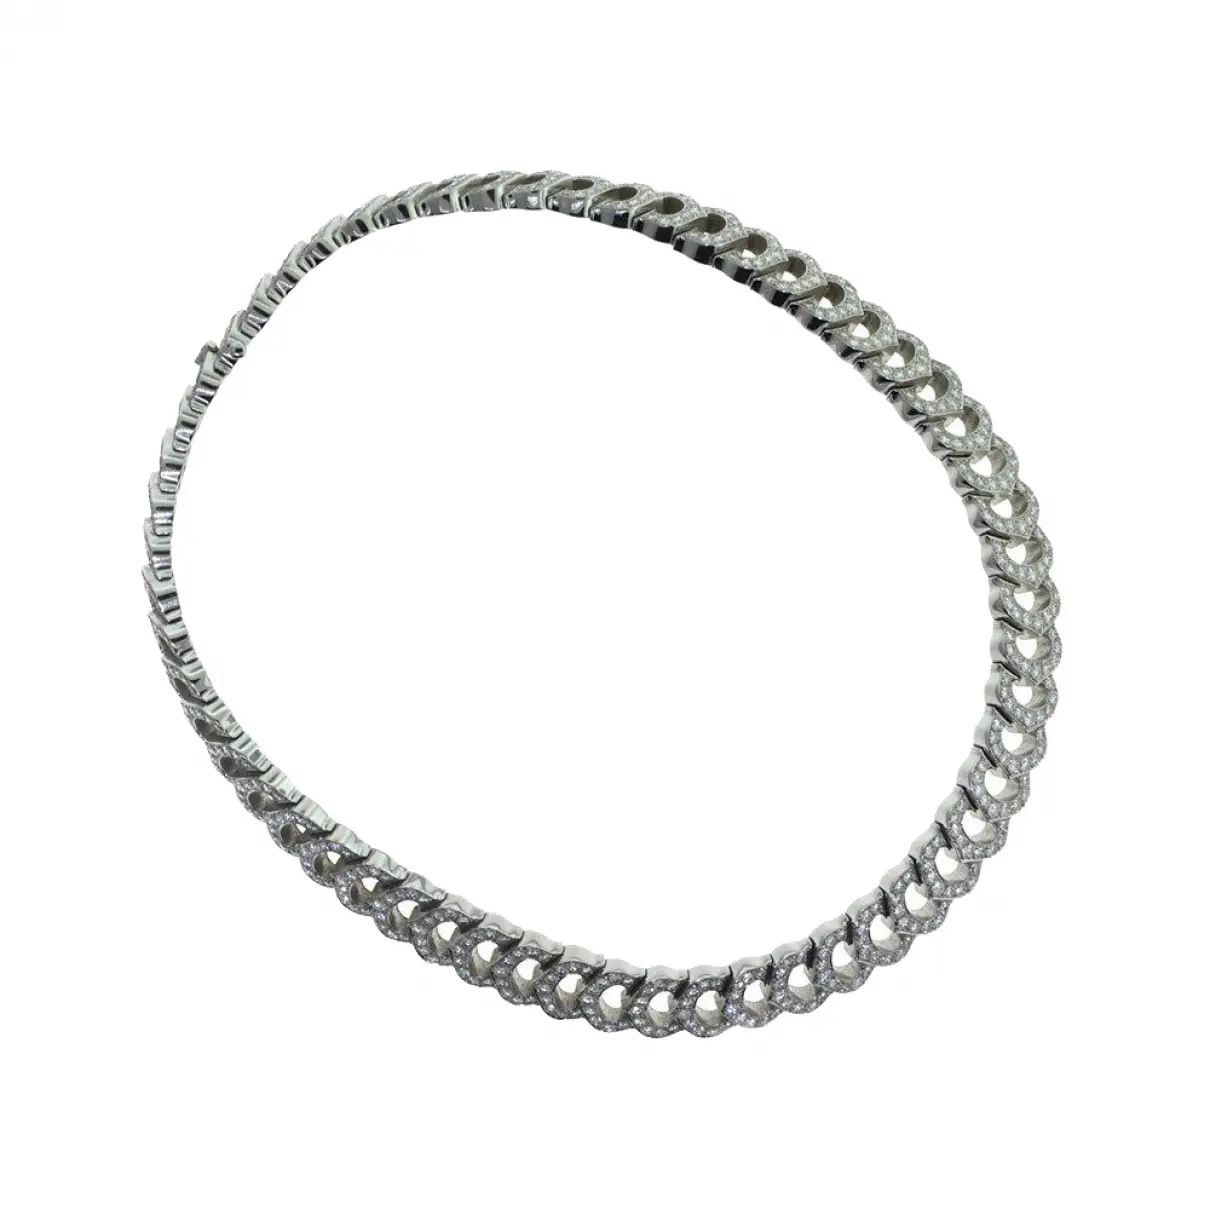 Buy Cartier C white gold necklace online